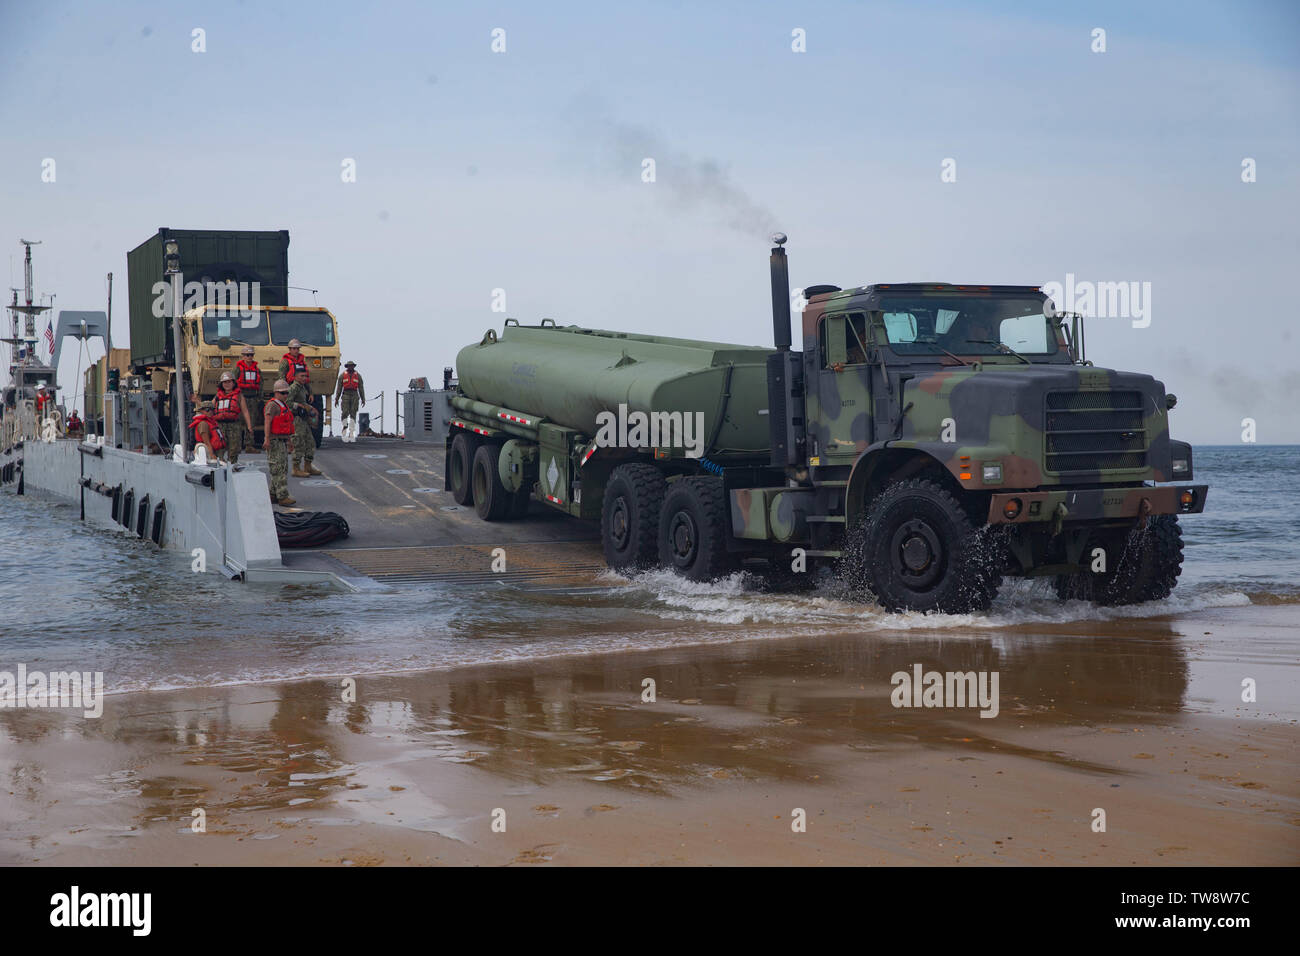 A U.S Marine Corps M970 semitrailer refueling truck with 2nd Transportation Support Battalion, Combat Logistics Regiment 2, 2nd Marine Logistics Group drives off a Navy improved navy lighterage system with Amphibious Construction Battalion 2, Naval Beach Group 2during exercise Resolute Sun at Fort Story, Virginia, June 17, 2019. U.S. Marines participated in the exercise to increase combat operational readiness in amphibious and prepositioning operations while conducting joint training with U.S. Army during a joint logistics over the shore scenario. (U.S. Marine Corps photo by Lance Cpl. Scott Stock Photo